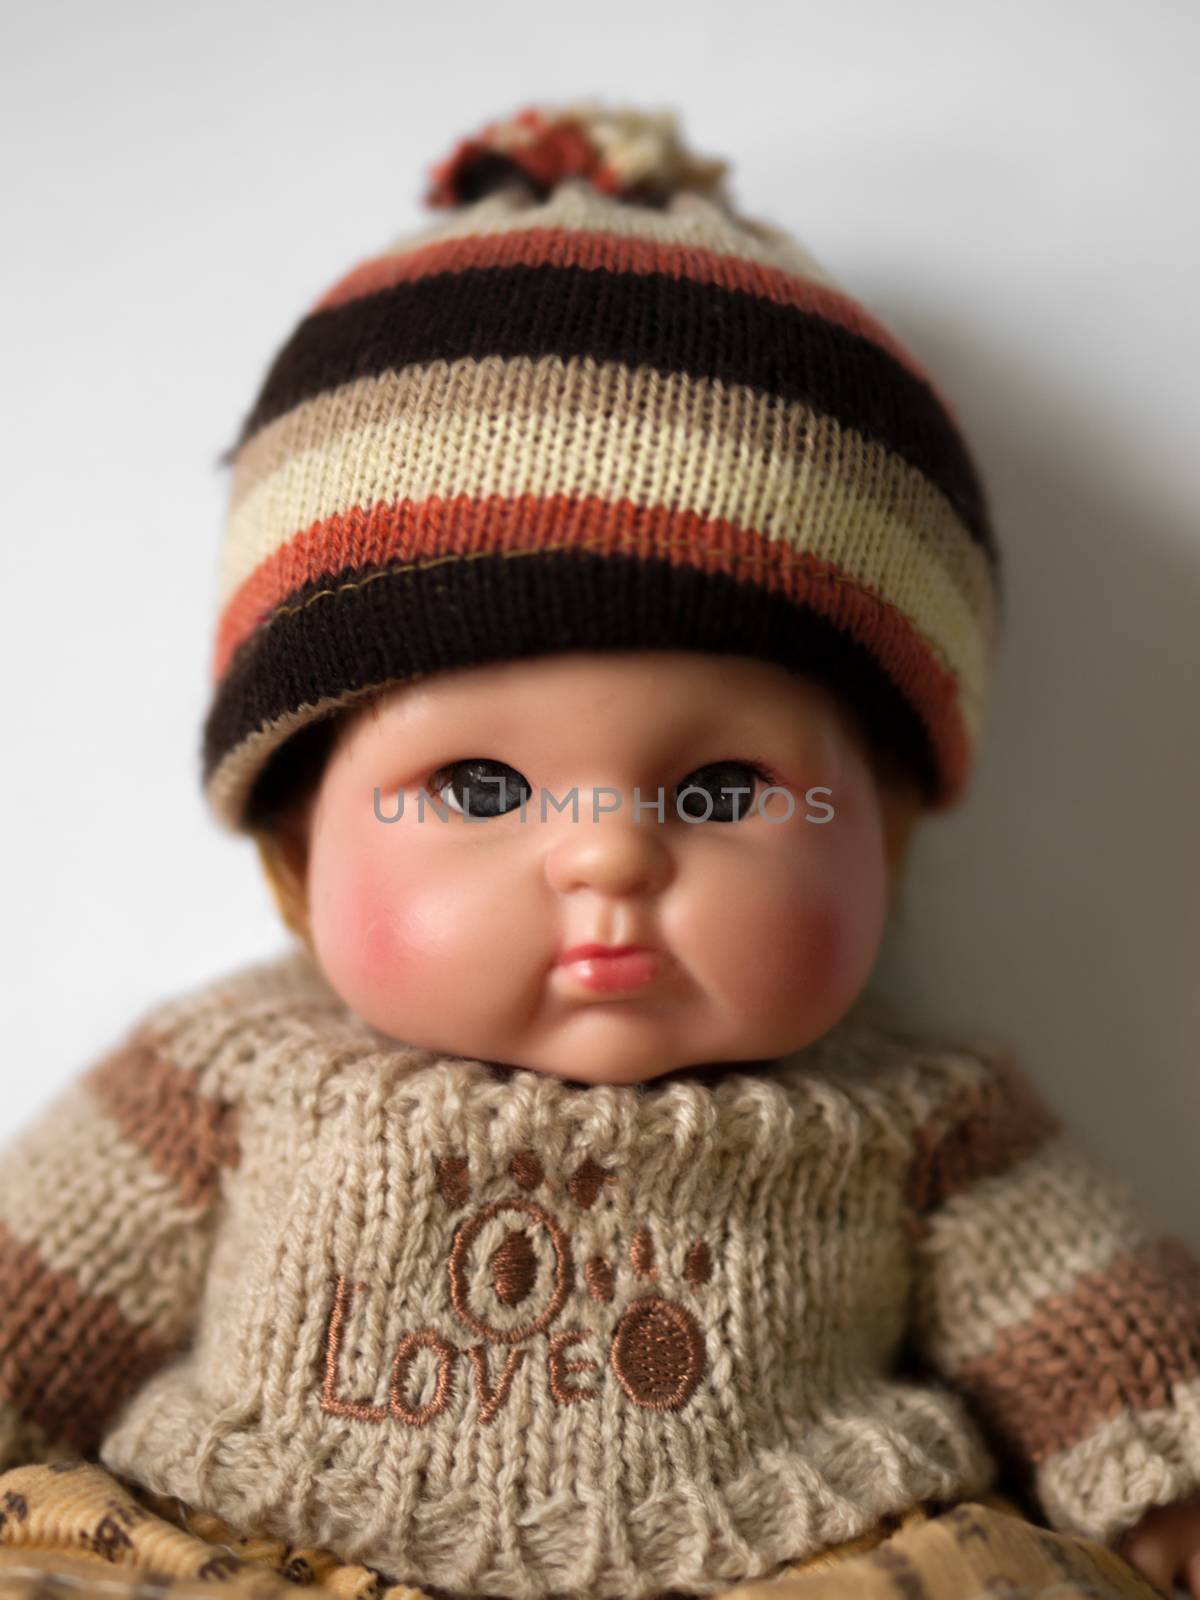 COLOR PHOTO OF PORTRAIT OF A DOLL